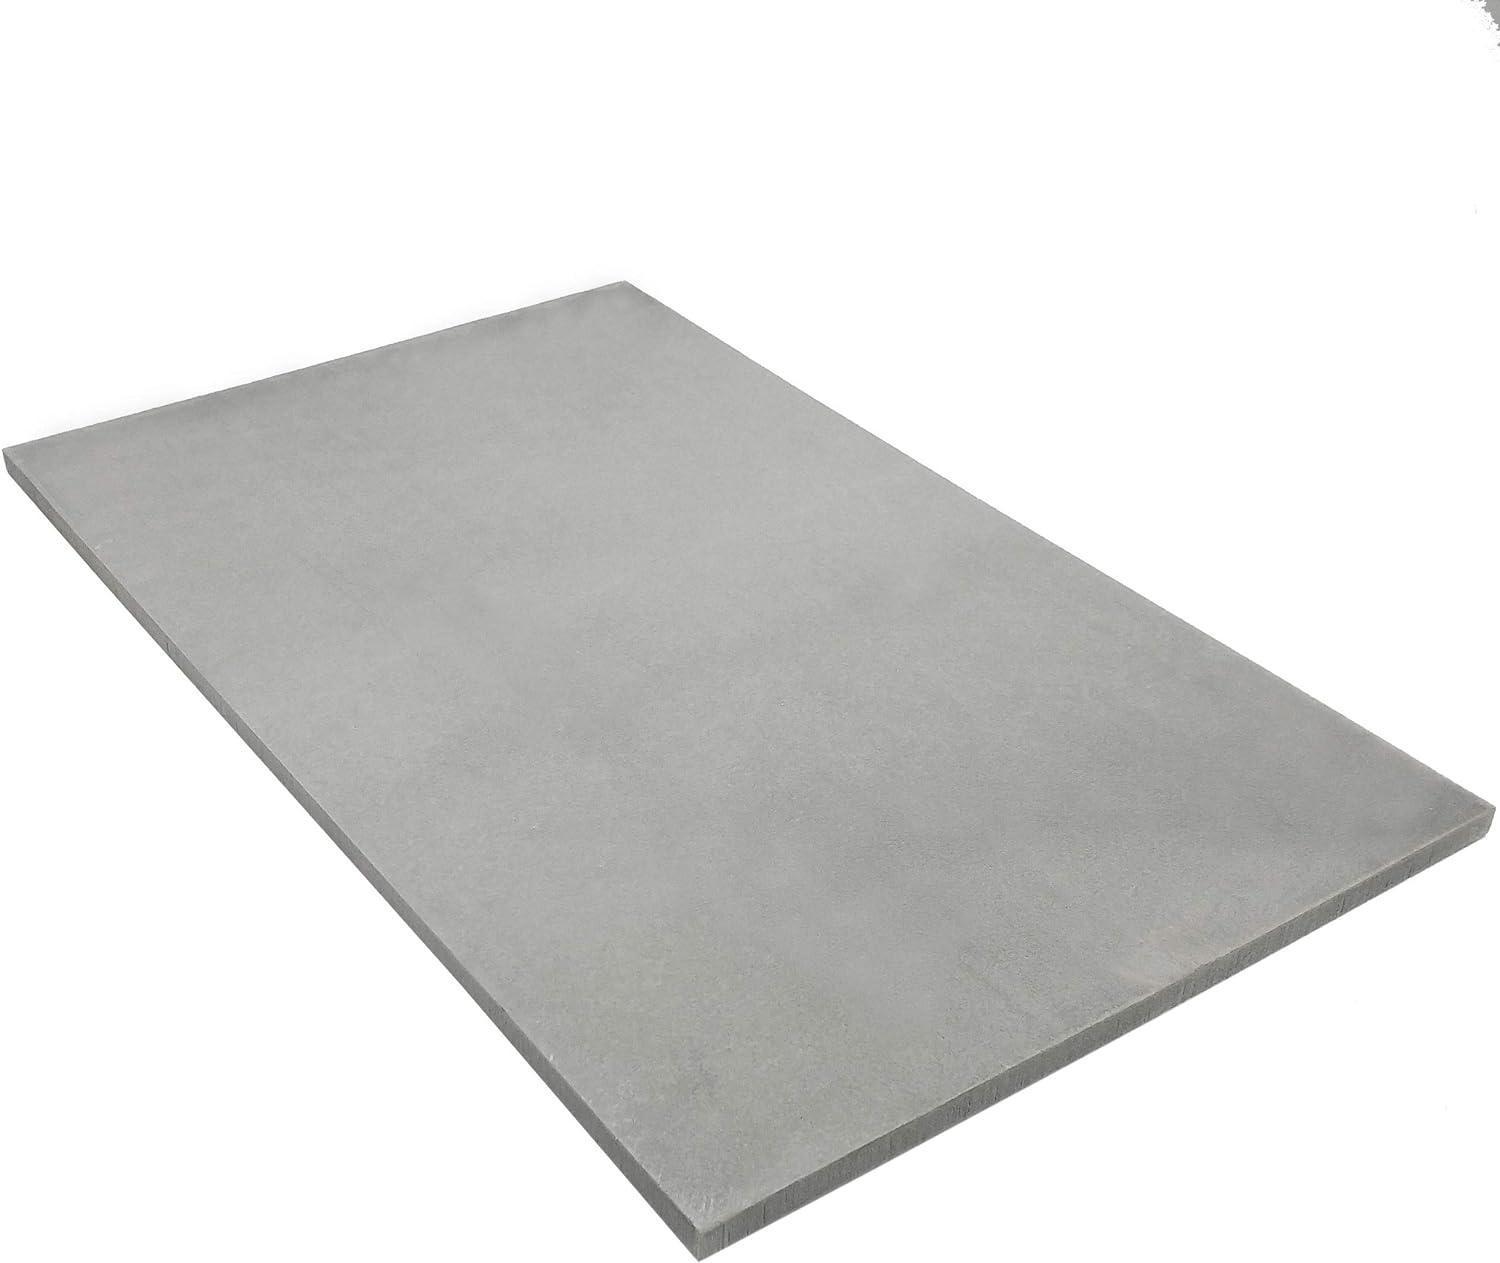 Lynn Manufacturing Replacement US Stove Baffle Board Refractory Insulation 2500, 88138, 2802A - Woodstove Fireplace Glass